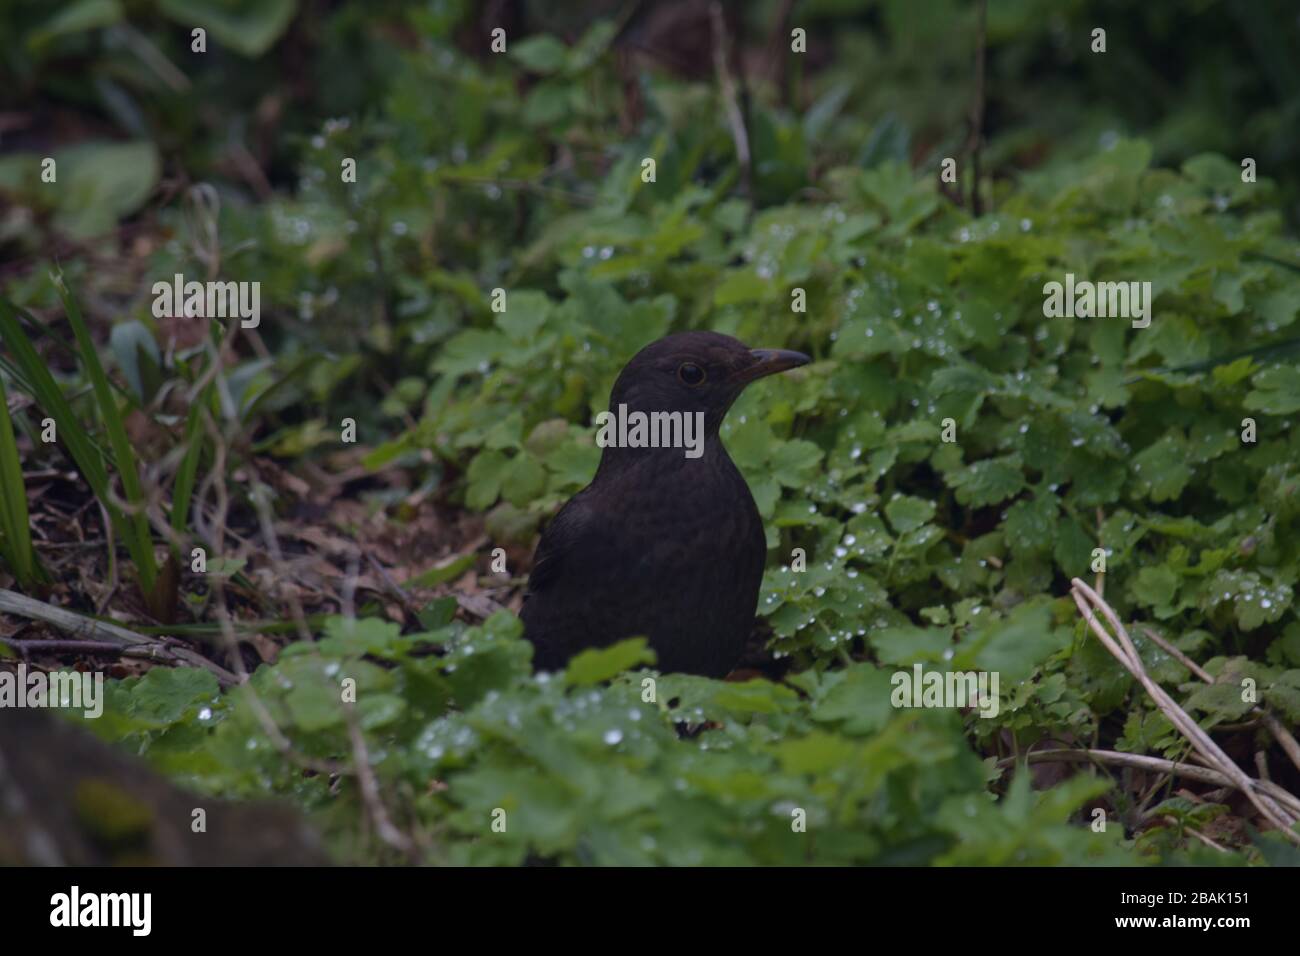 Image of a blackbird foraging for food Stock Photo